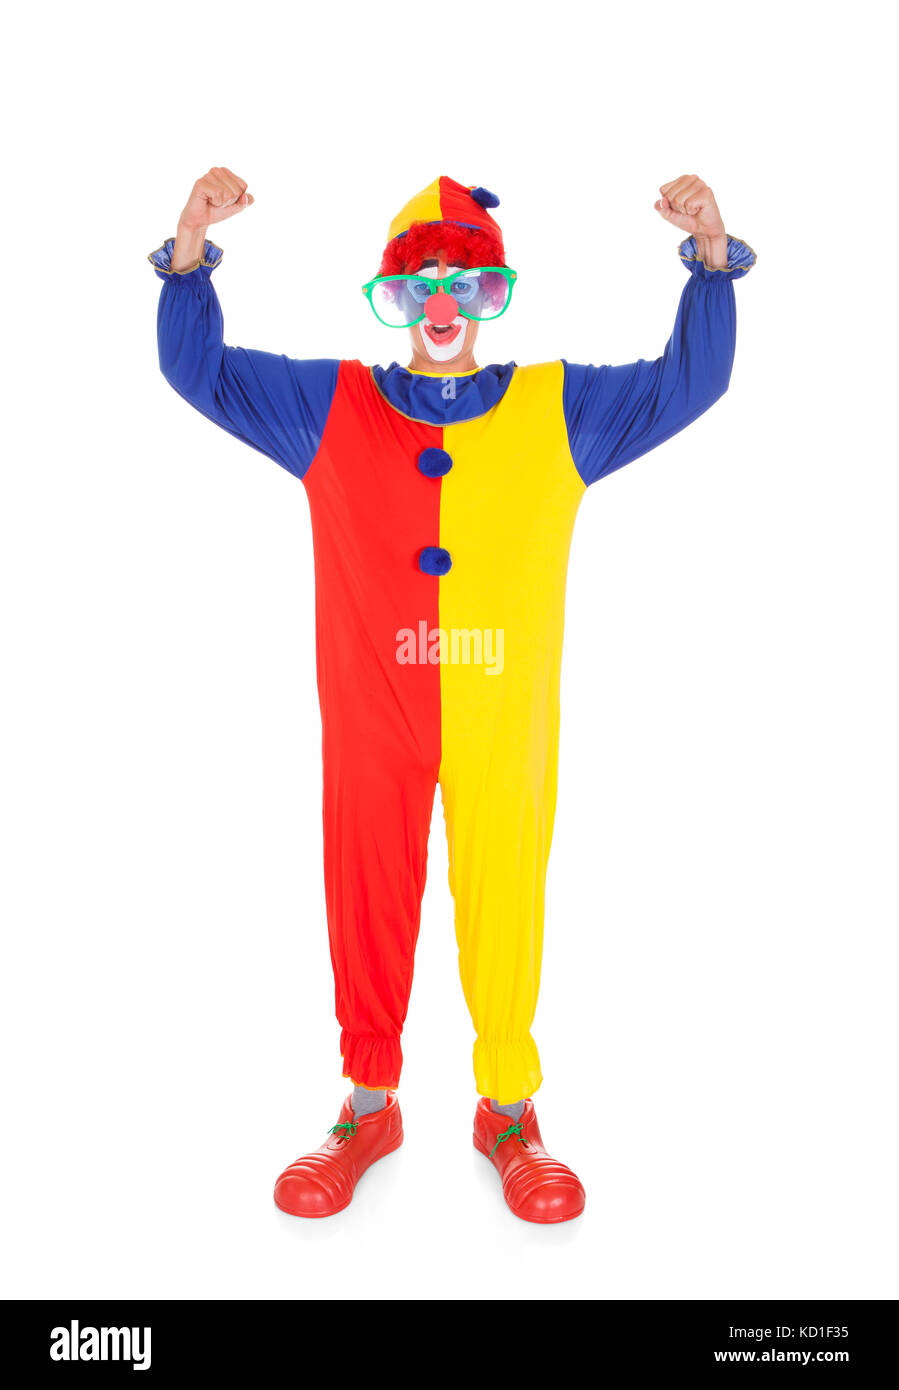 Portrait Of A Happy Joker Clenching His Fist Over White Background Stock Photo